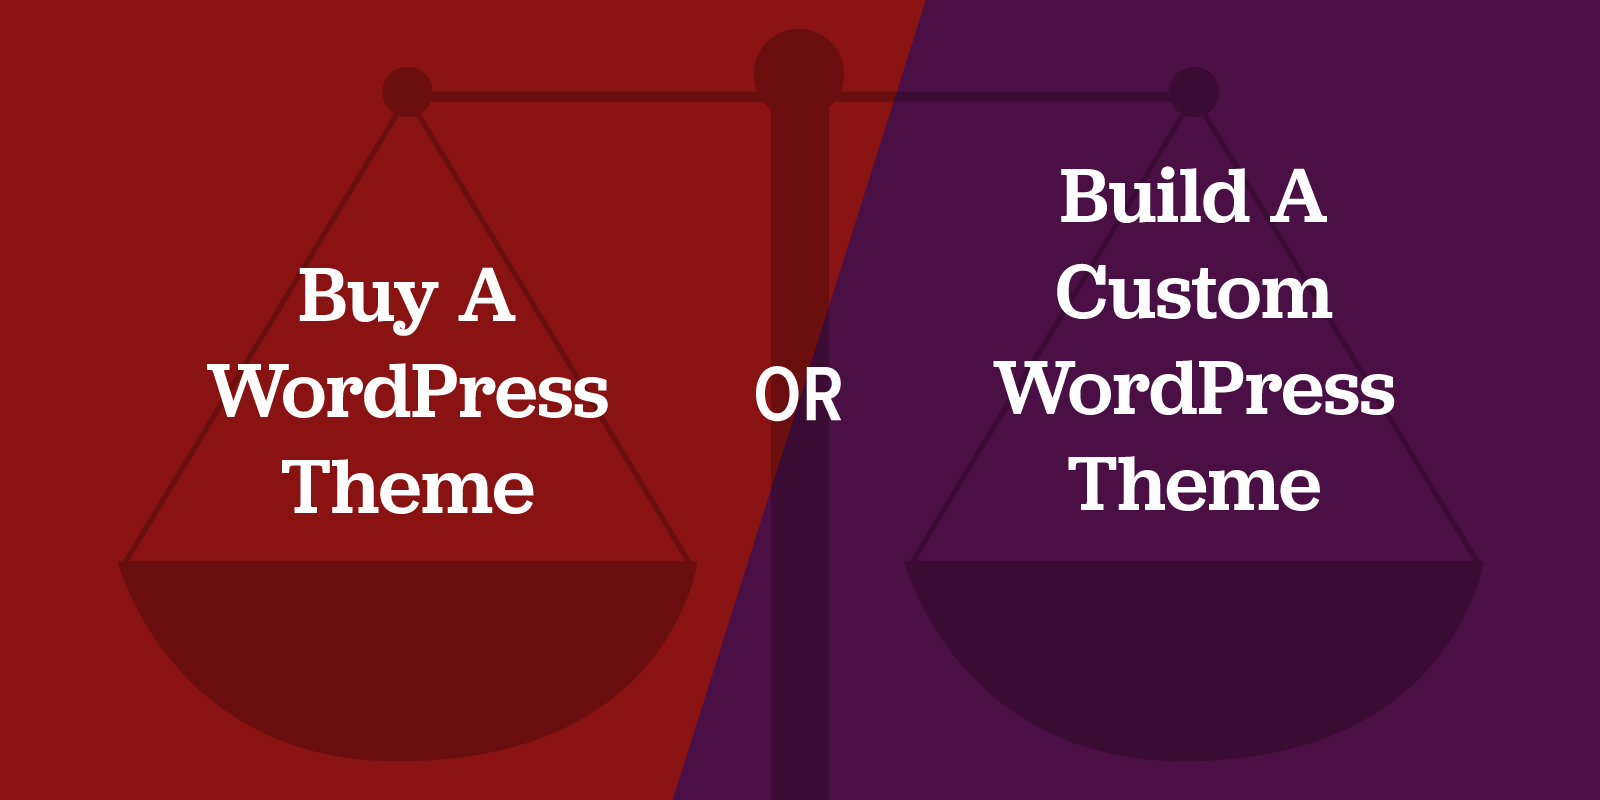 Shoud you buy a WordPress theme or build a custom WordPress theme? There are more options than you think...